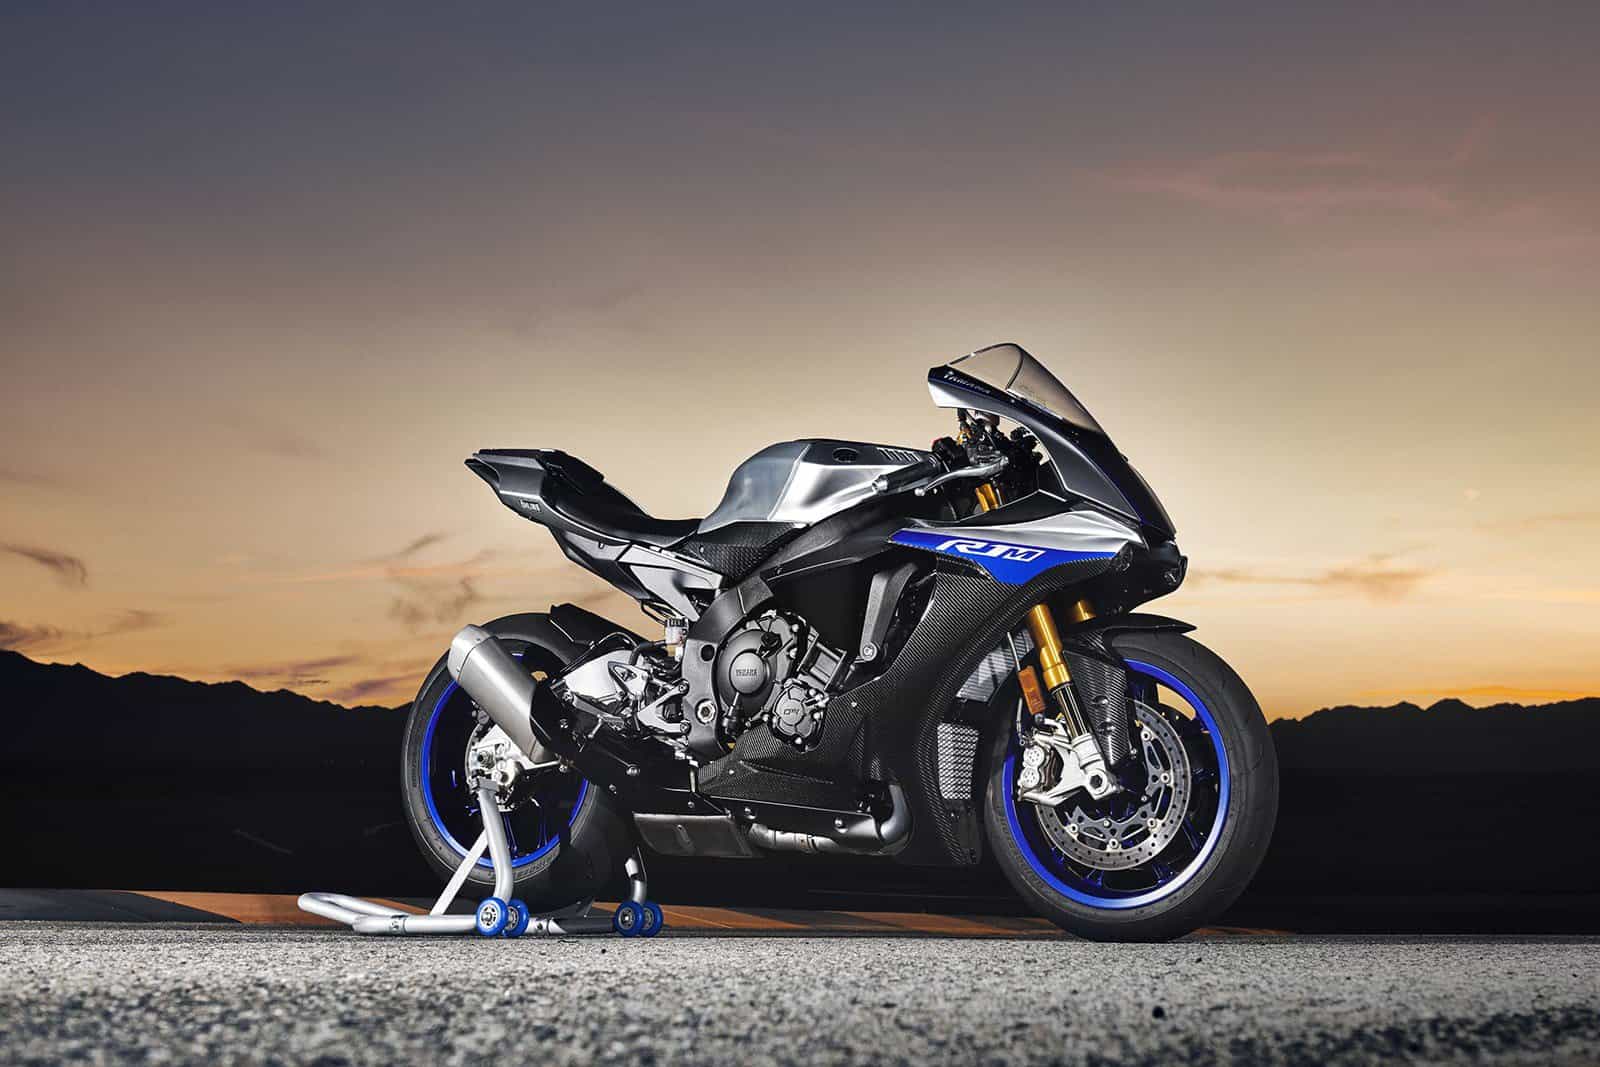 Ride The Yamaha R1M Into The Sunset